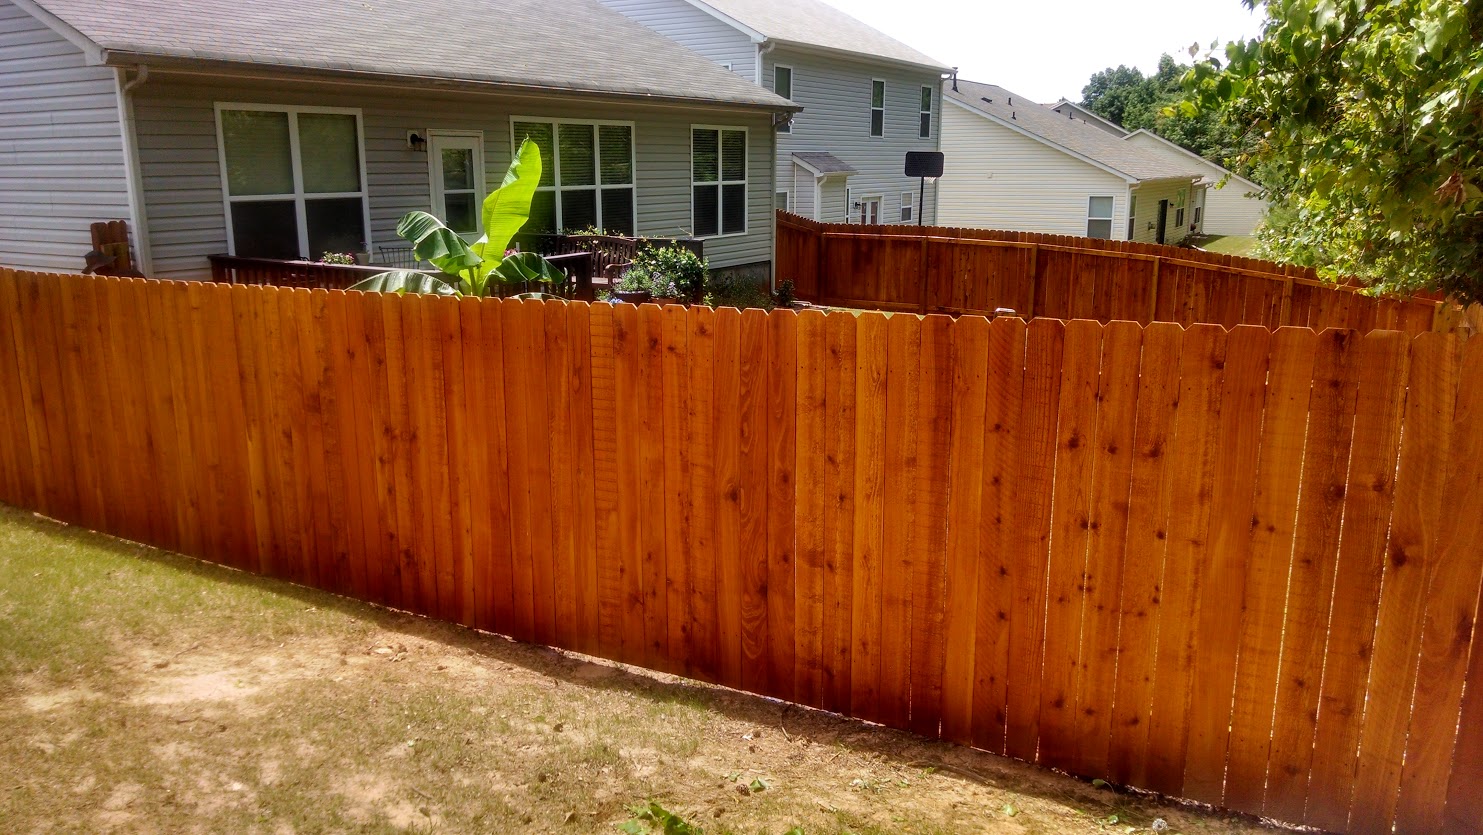 Stain-N-Seal Solution - Atlanta Fence treatment and repair company.